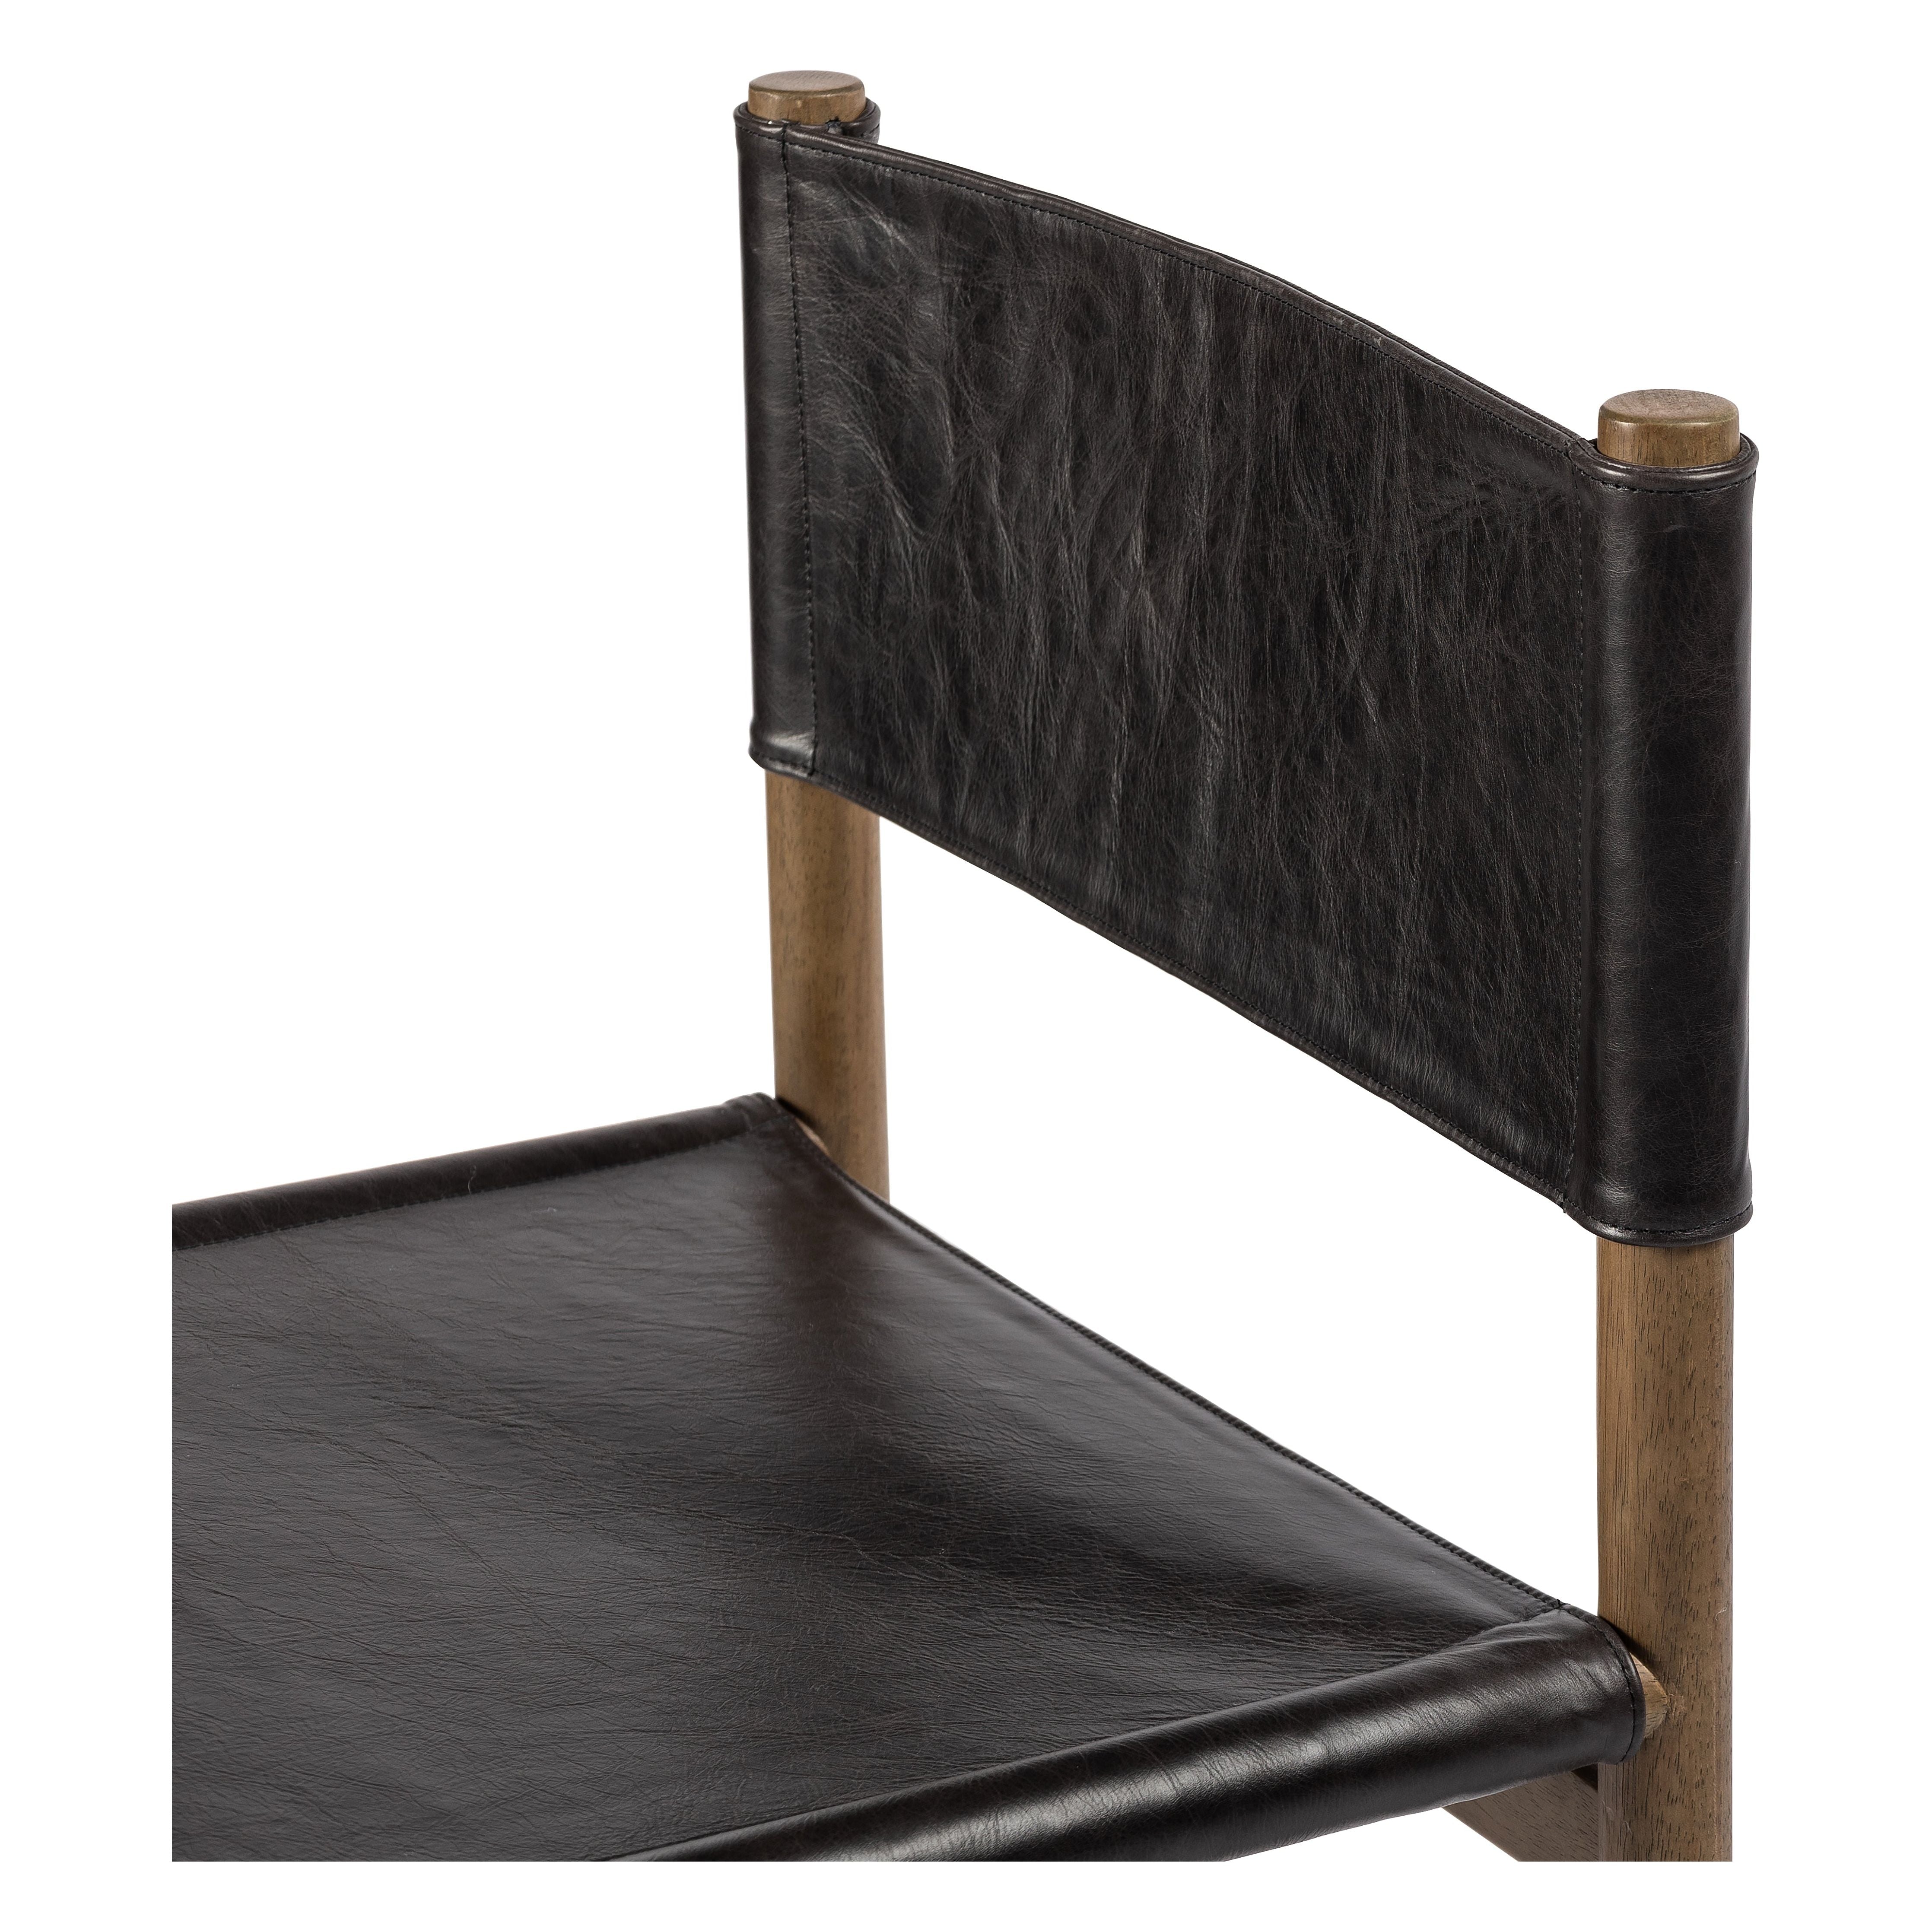 Solid parawood forms a simple, vintage-inspired frame for sling-style seating of black top-grain leather exclusive to Four Hands. Amethyst Home provides interior design, new construction, custom furniture, and area rugs in the Miami metro area.